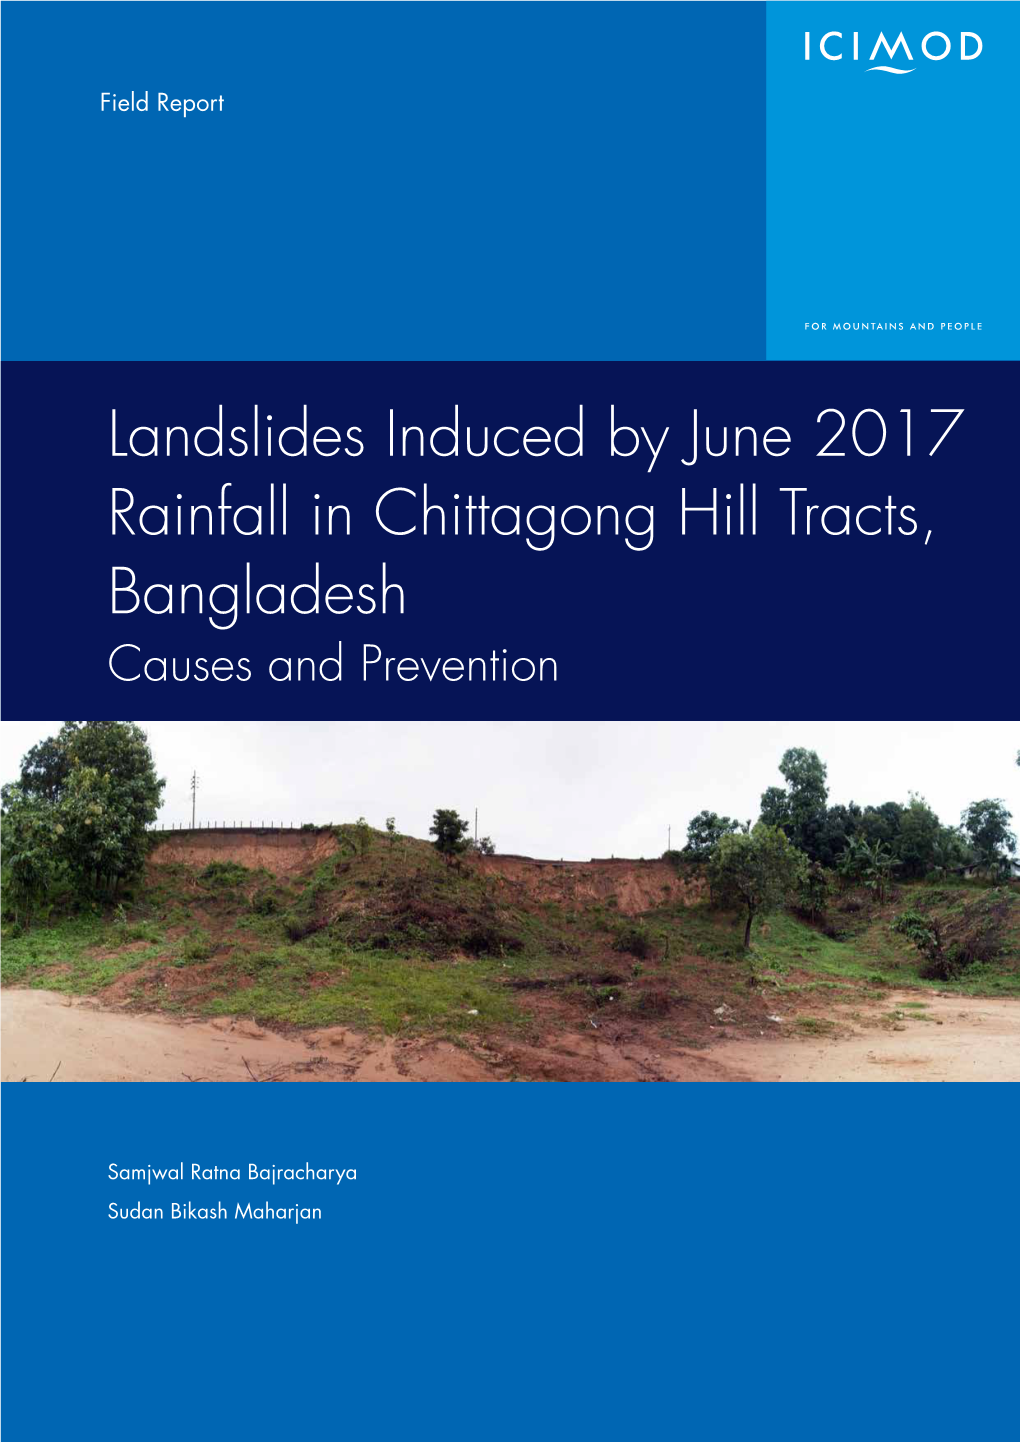 Landslides Induced by June 2017 Rainfall in Chittagong Hill Tracts, Bangladesh Field Report